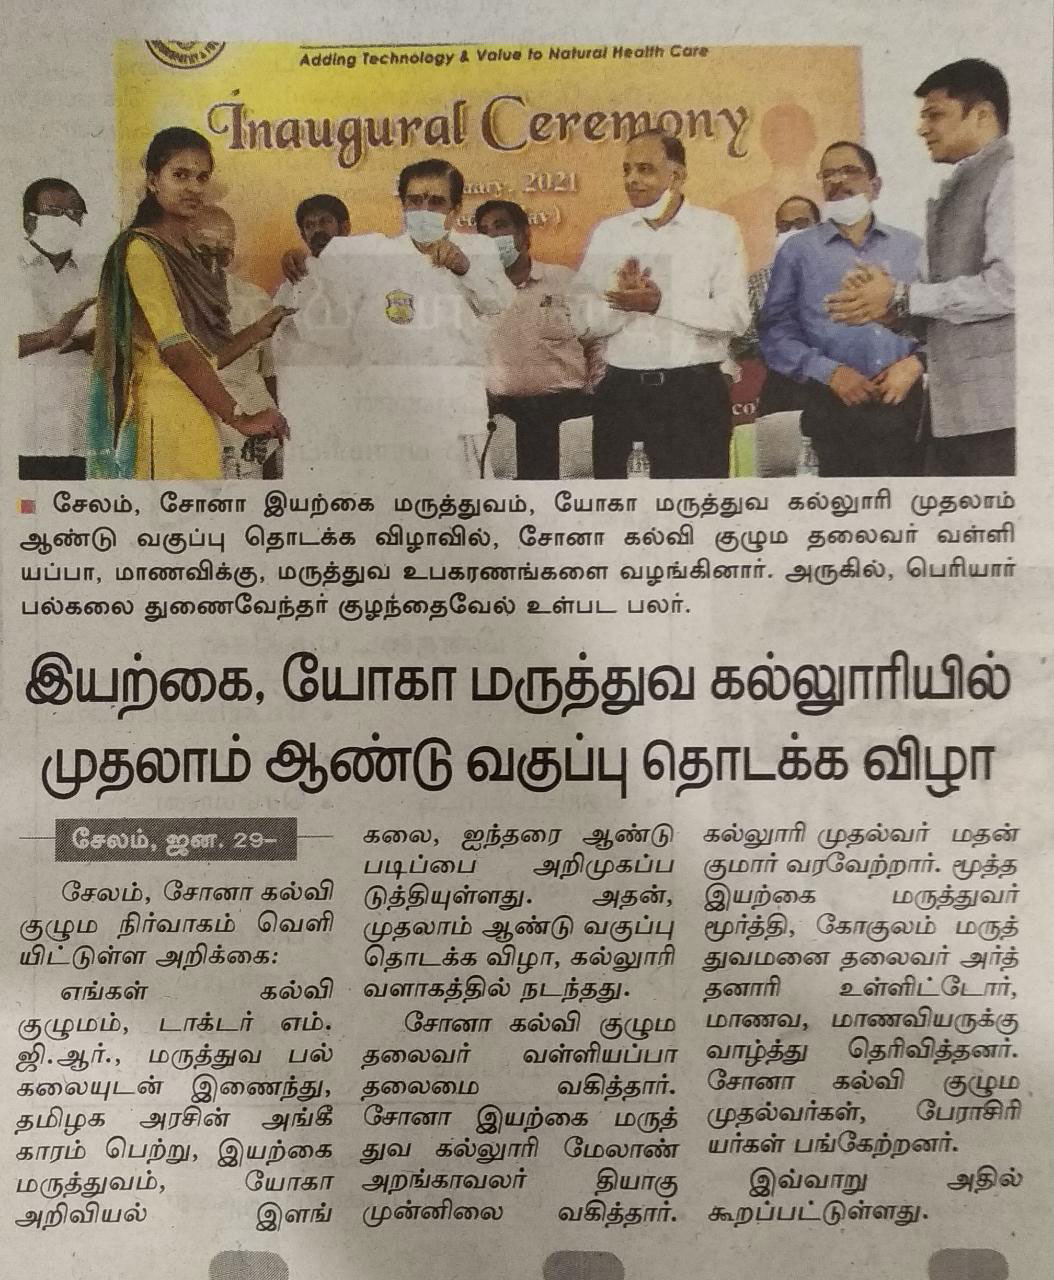 First Batch for the BNYS Course Inaugurated at Salem Sona Medical College of Naturopathy and Yoga - Published in Kaalaikathir